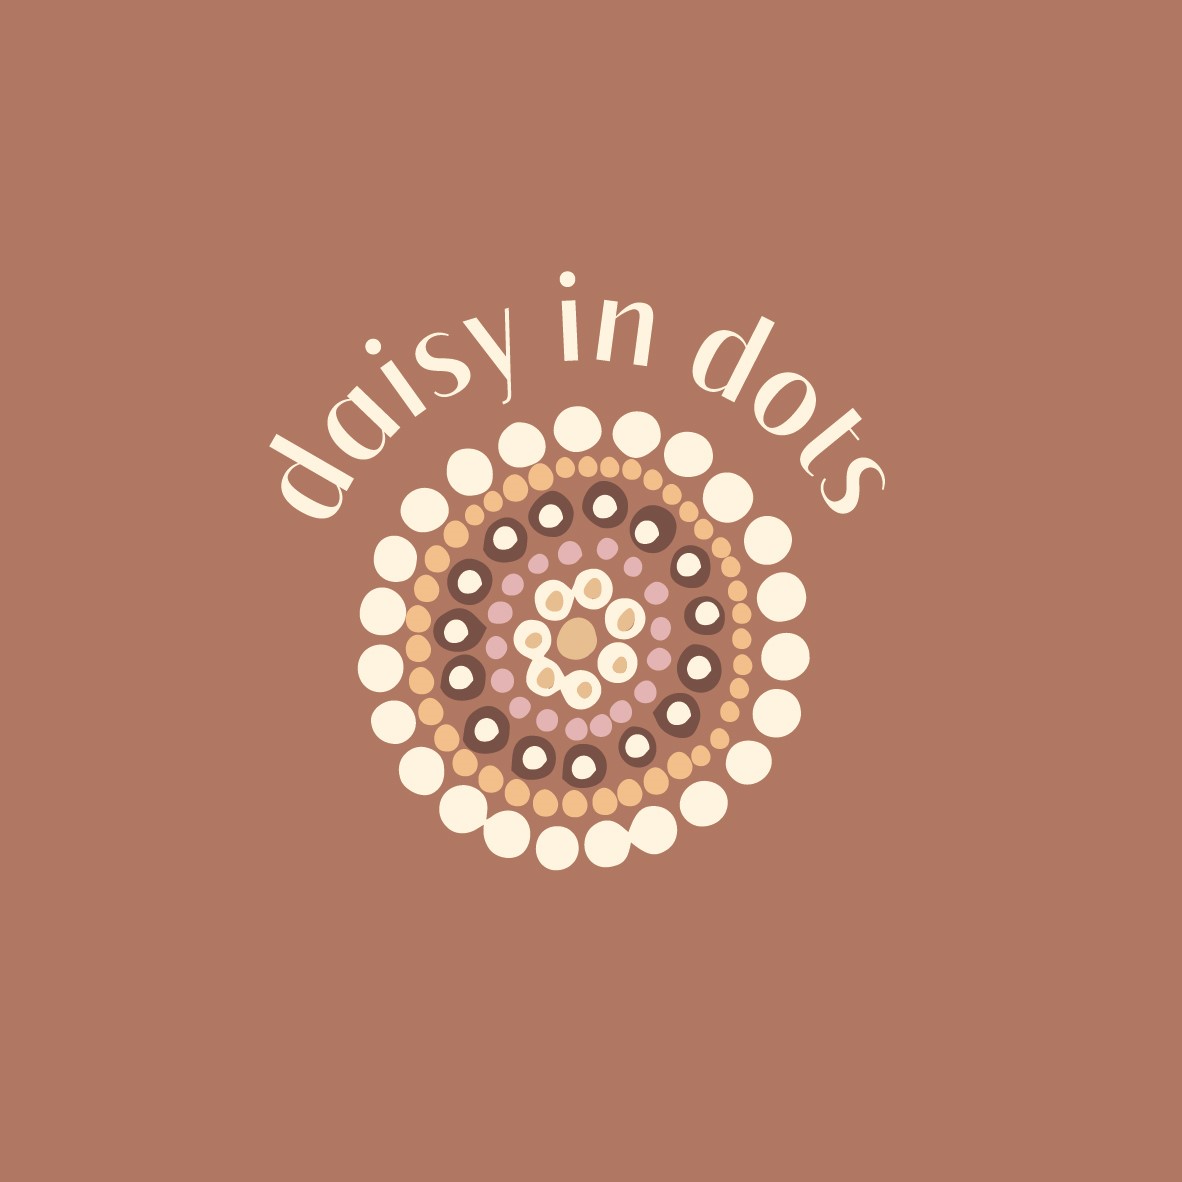 Contemporary / Modern, Scandinavian, Design by Mouse, Daisy in Dots, Tingari Arts Artworks